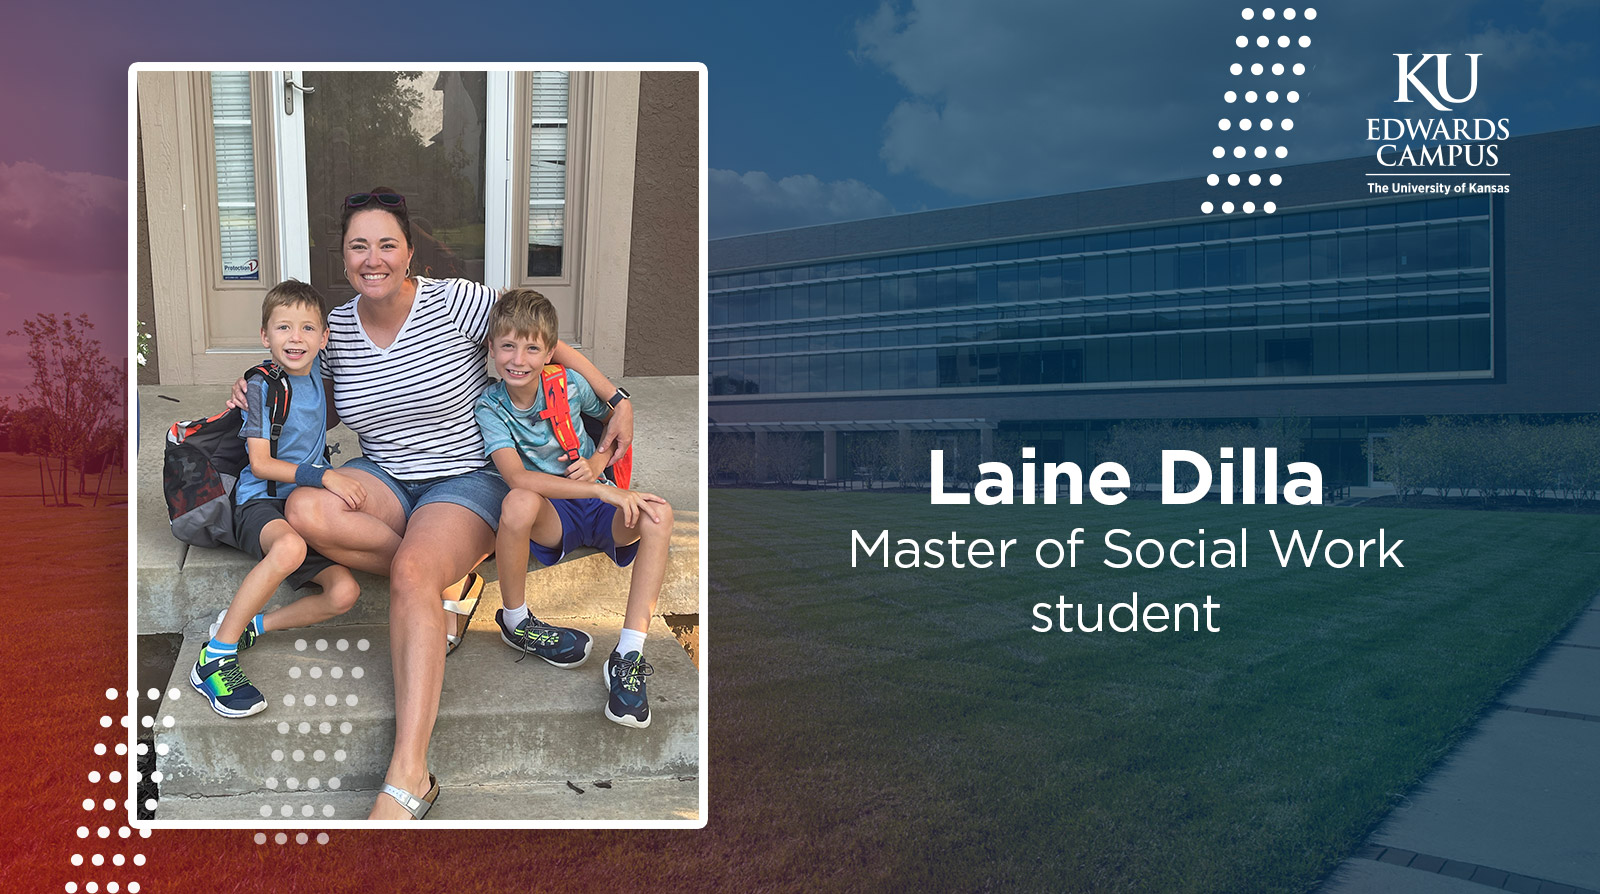 A photo of Laine Dilla with children with the text Laine Dilla, Master of Social Work student